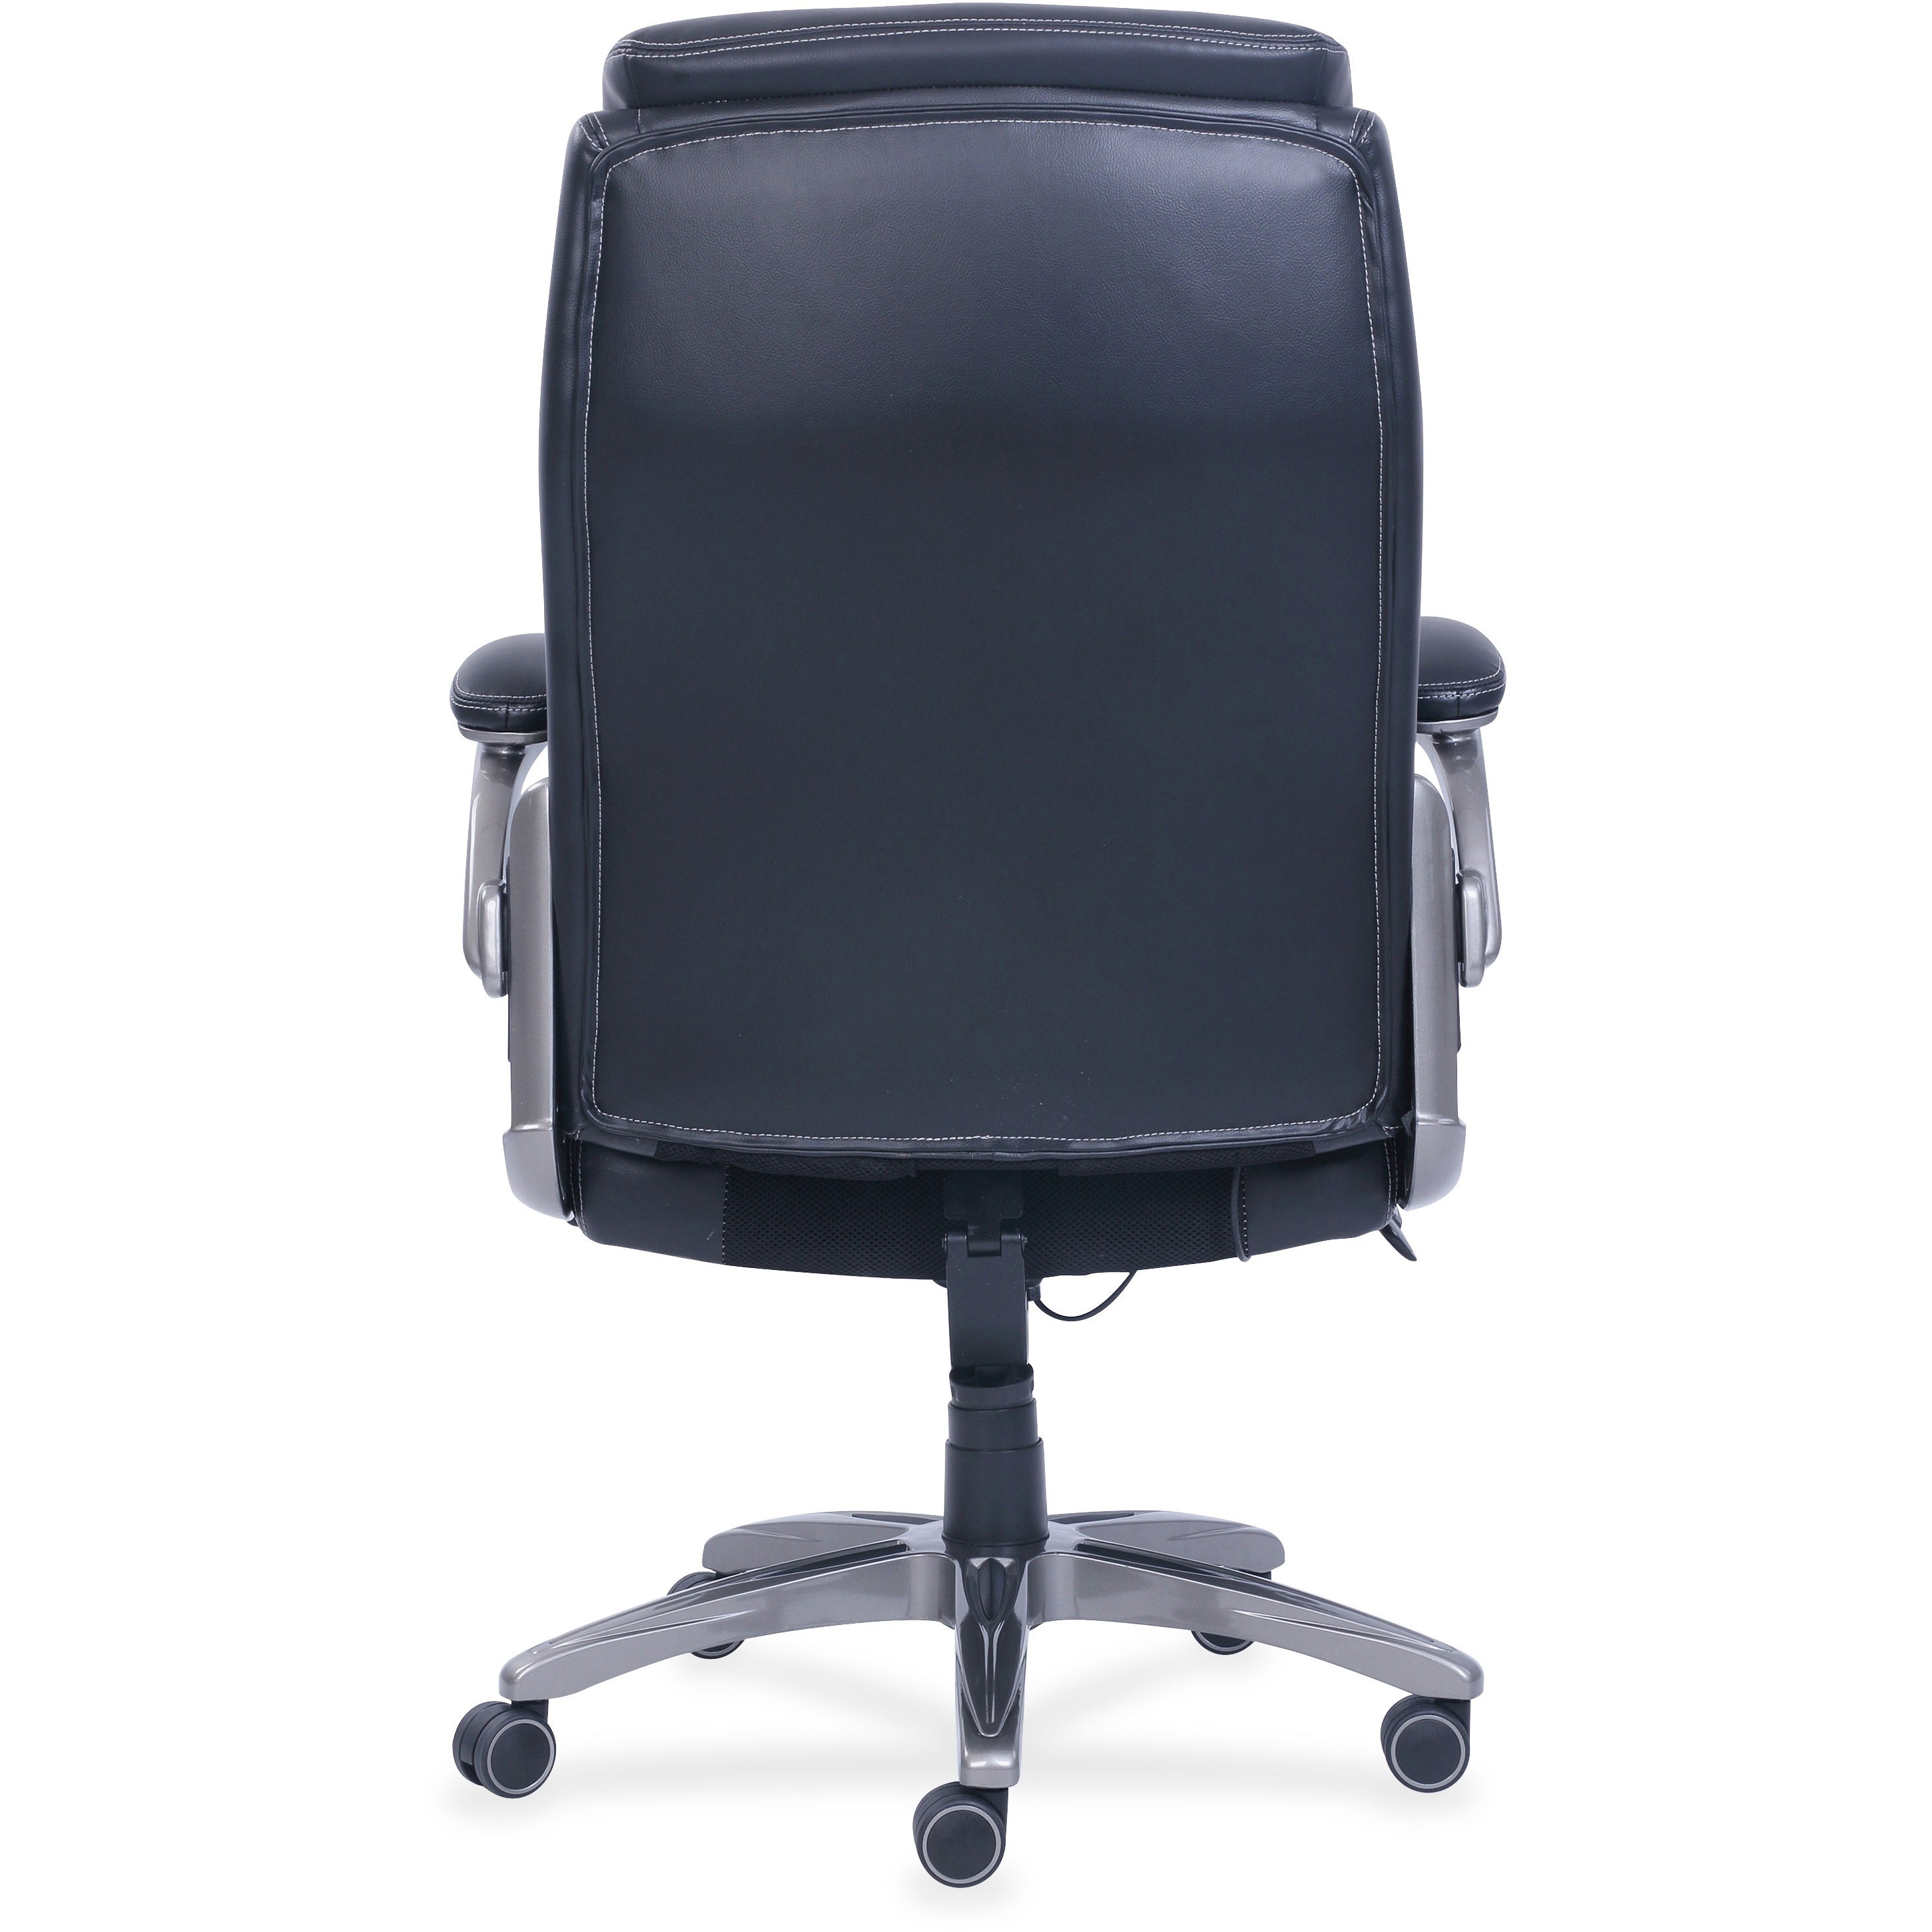 lorell-wellness-by-design-revive-executive-office-chair-black-bonded-leather-seat-black-bonded-leather-back-5-star-base-1-each_llr48730 - 4